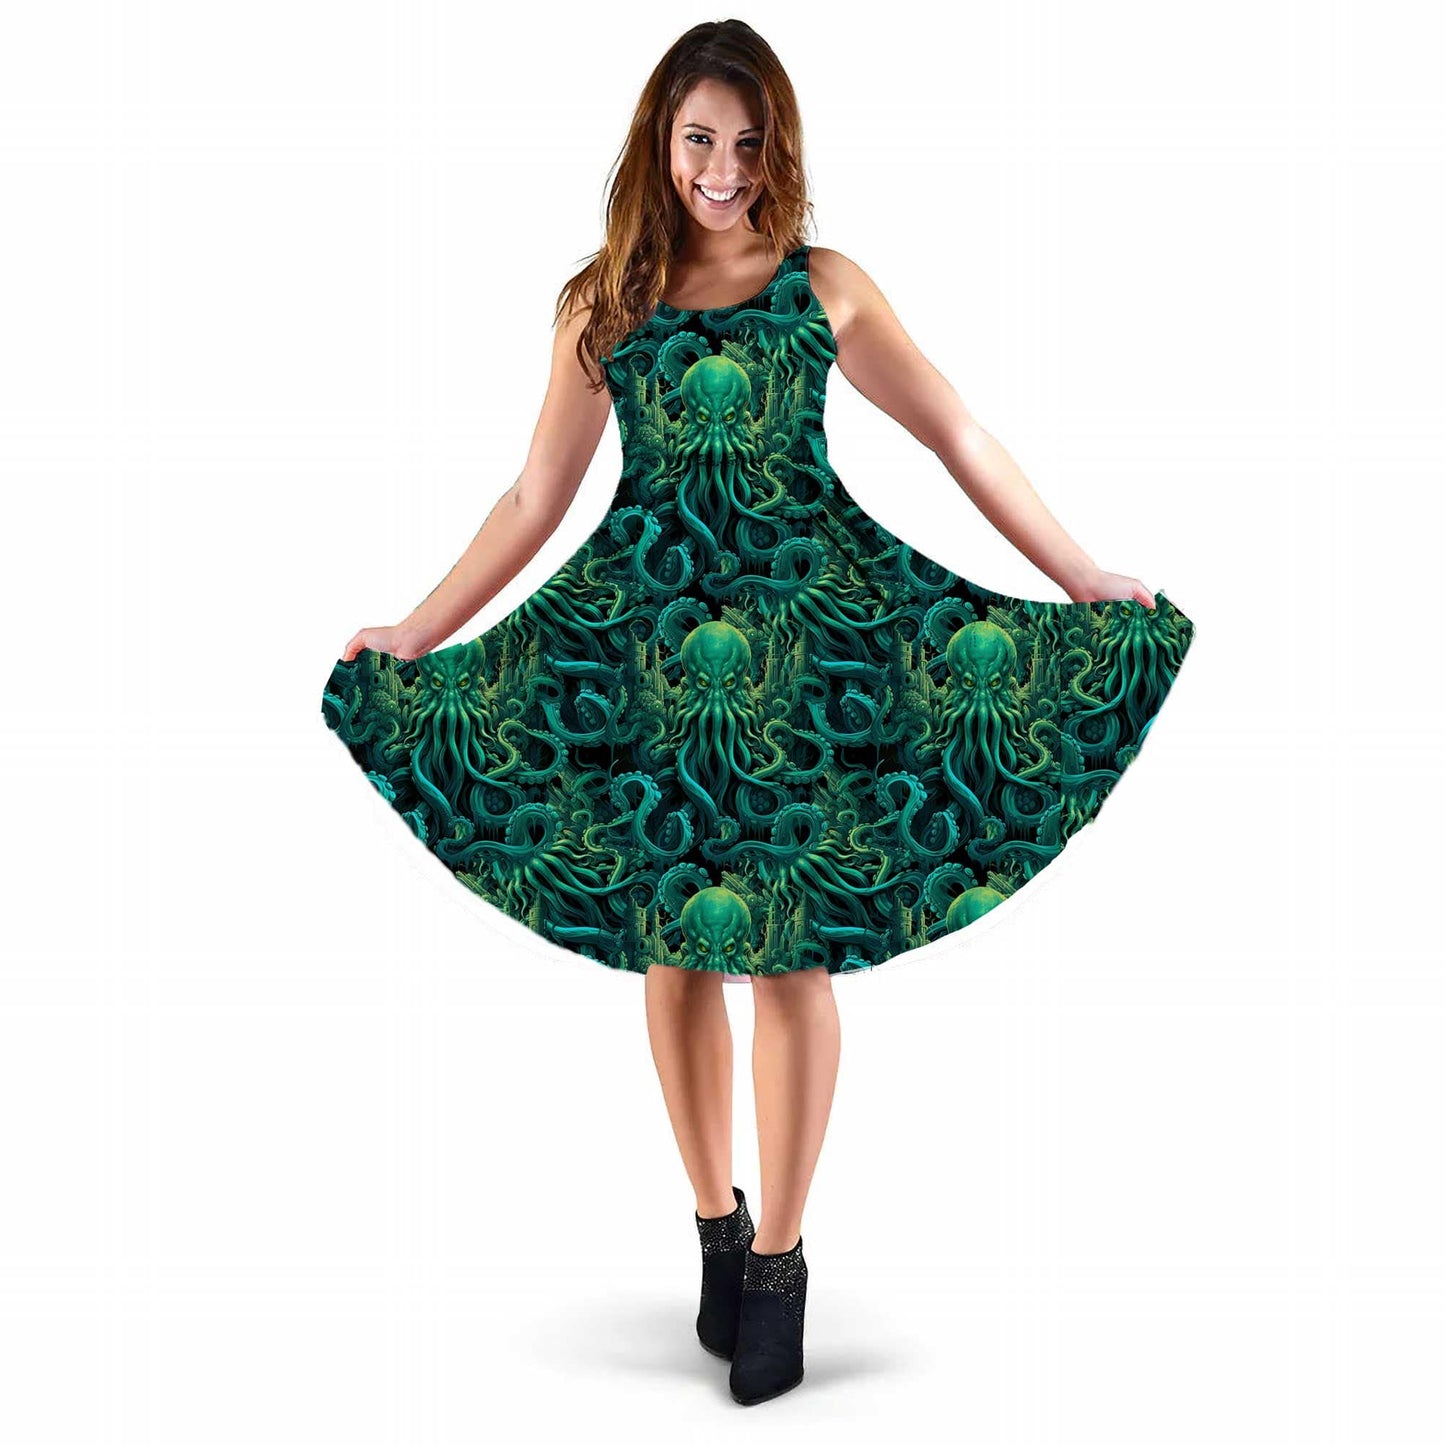 The legend of Lovecraft comes to your wardrobe with a vibrant dark green printed polyester velvet Cthulhu dress with pockets at Gallery Serpentine